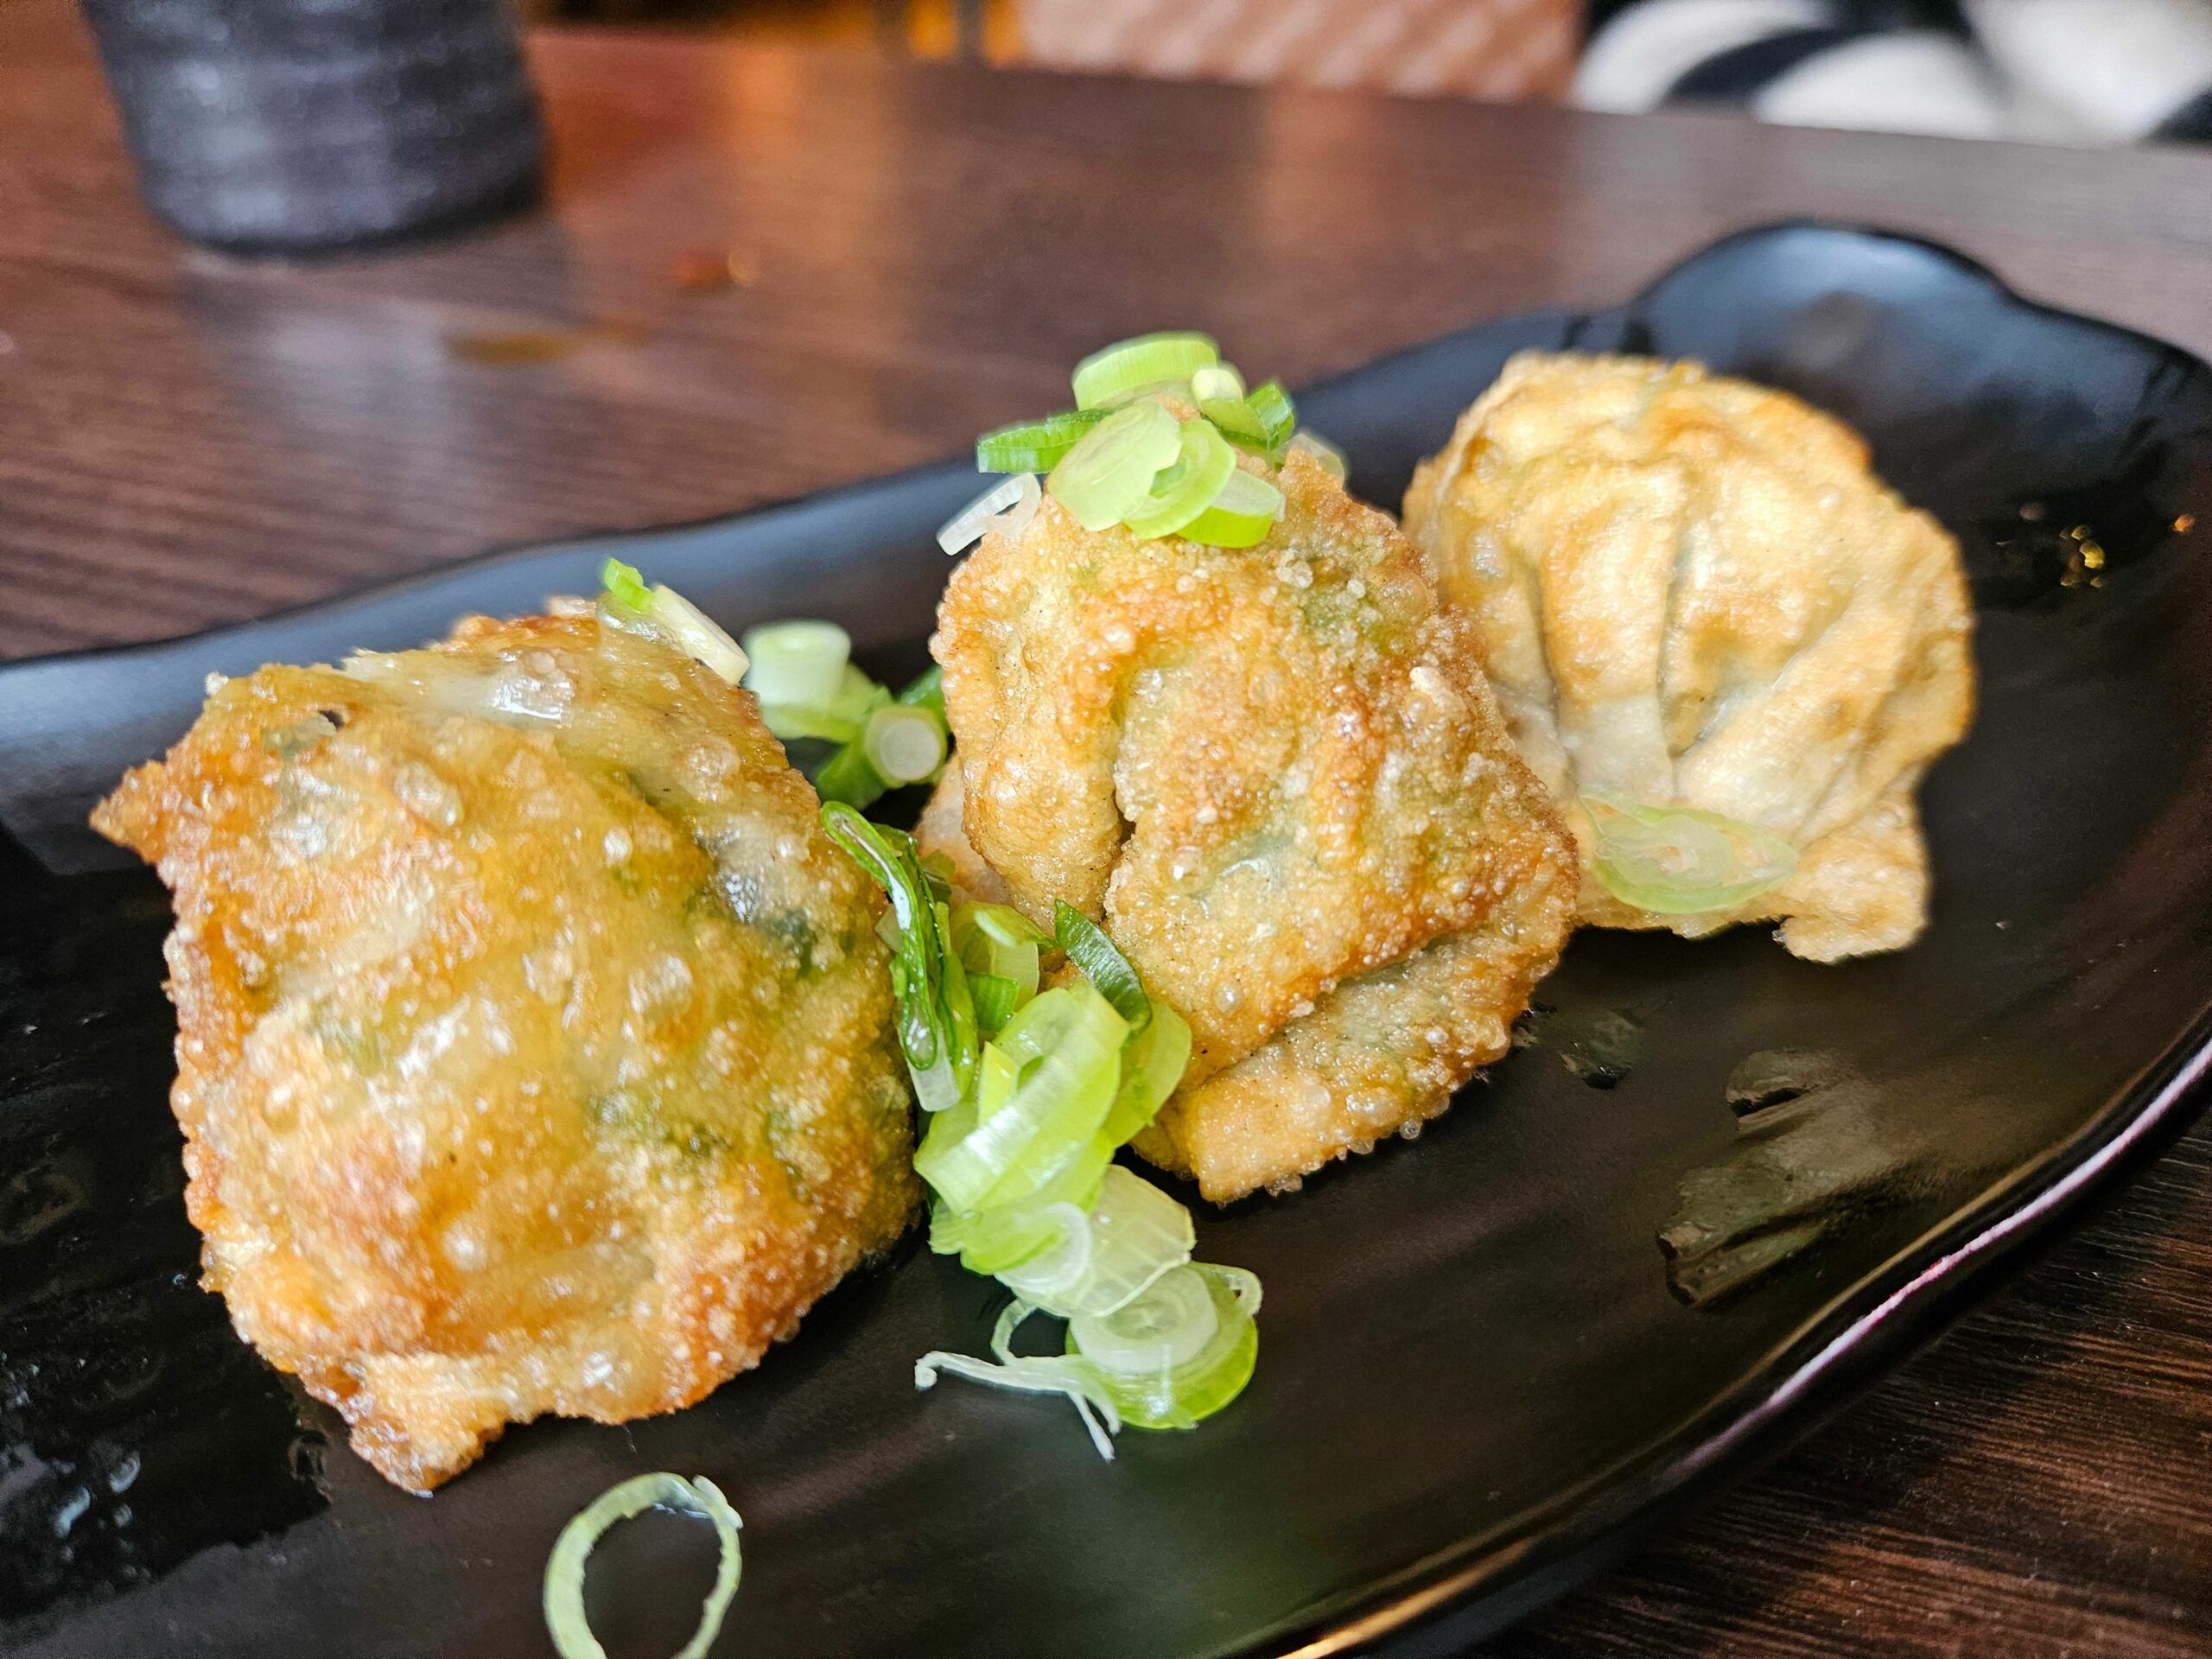 rawn Gyoza, served deep-fried and crunchy, with a traditional dumpling dipping sauce